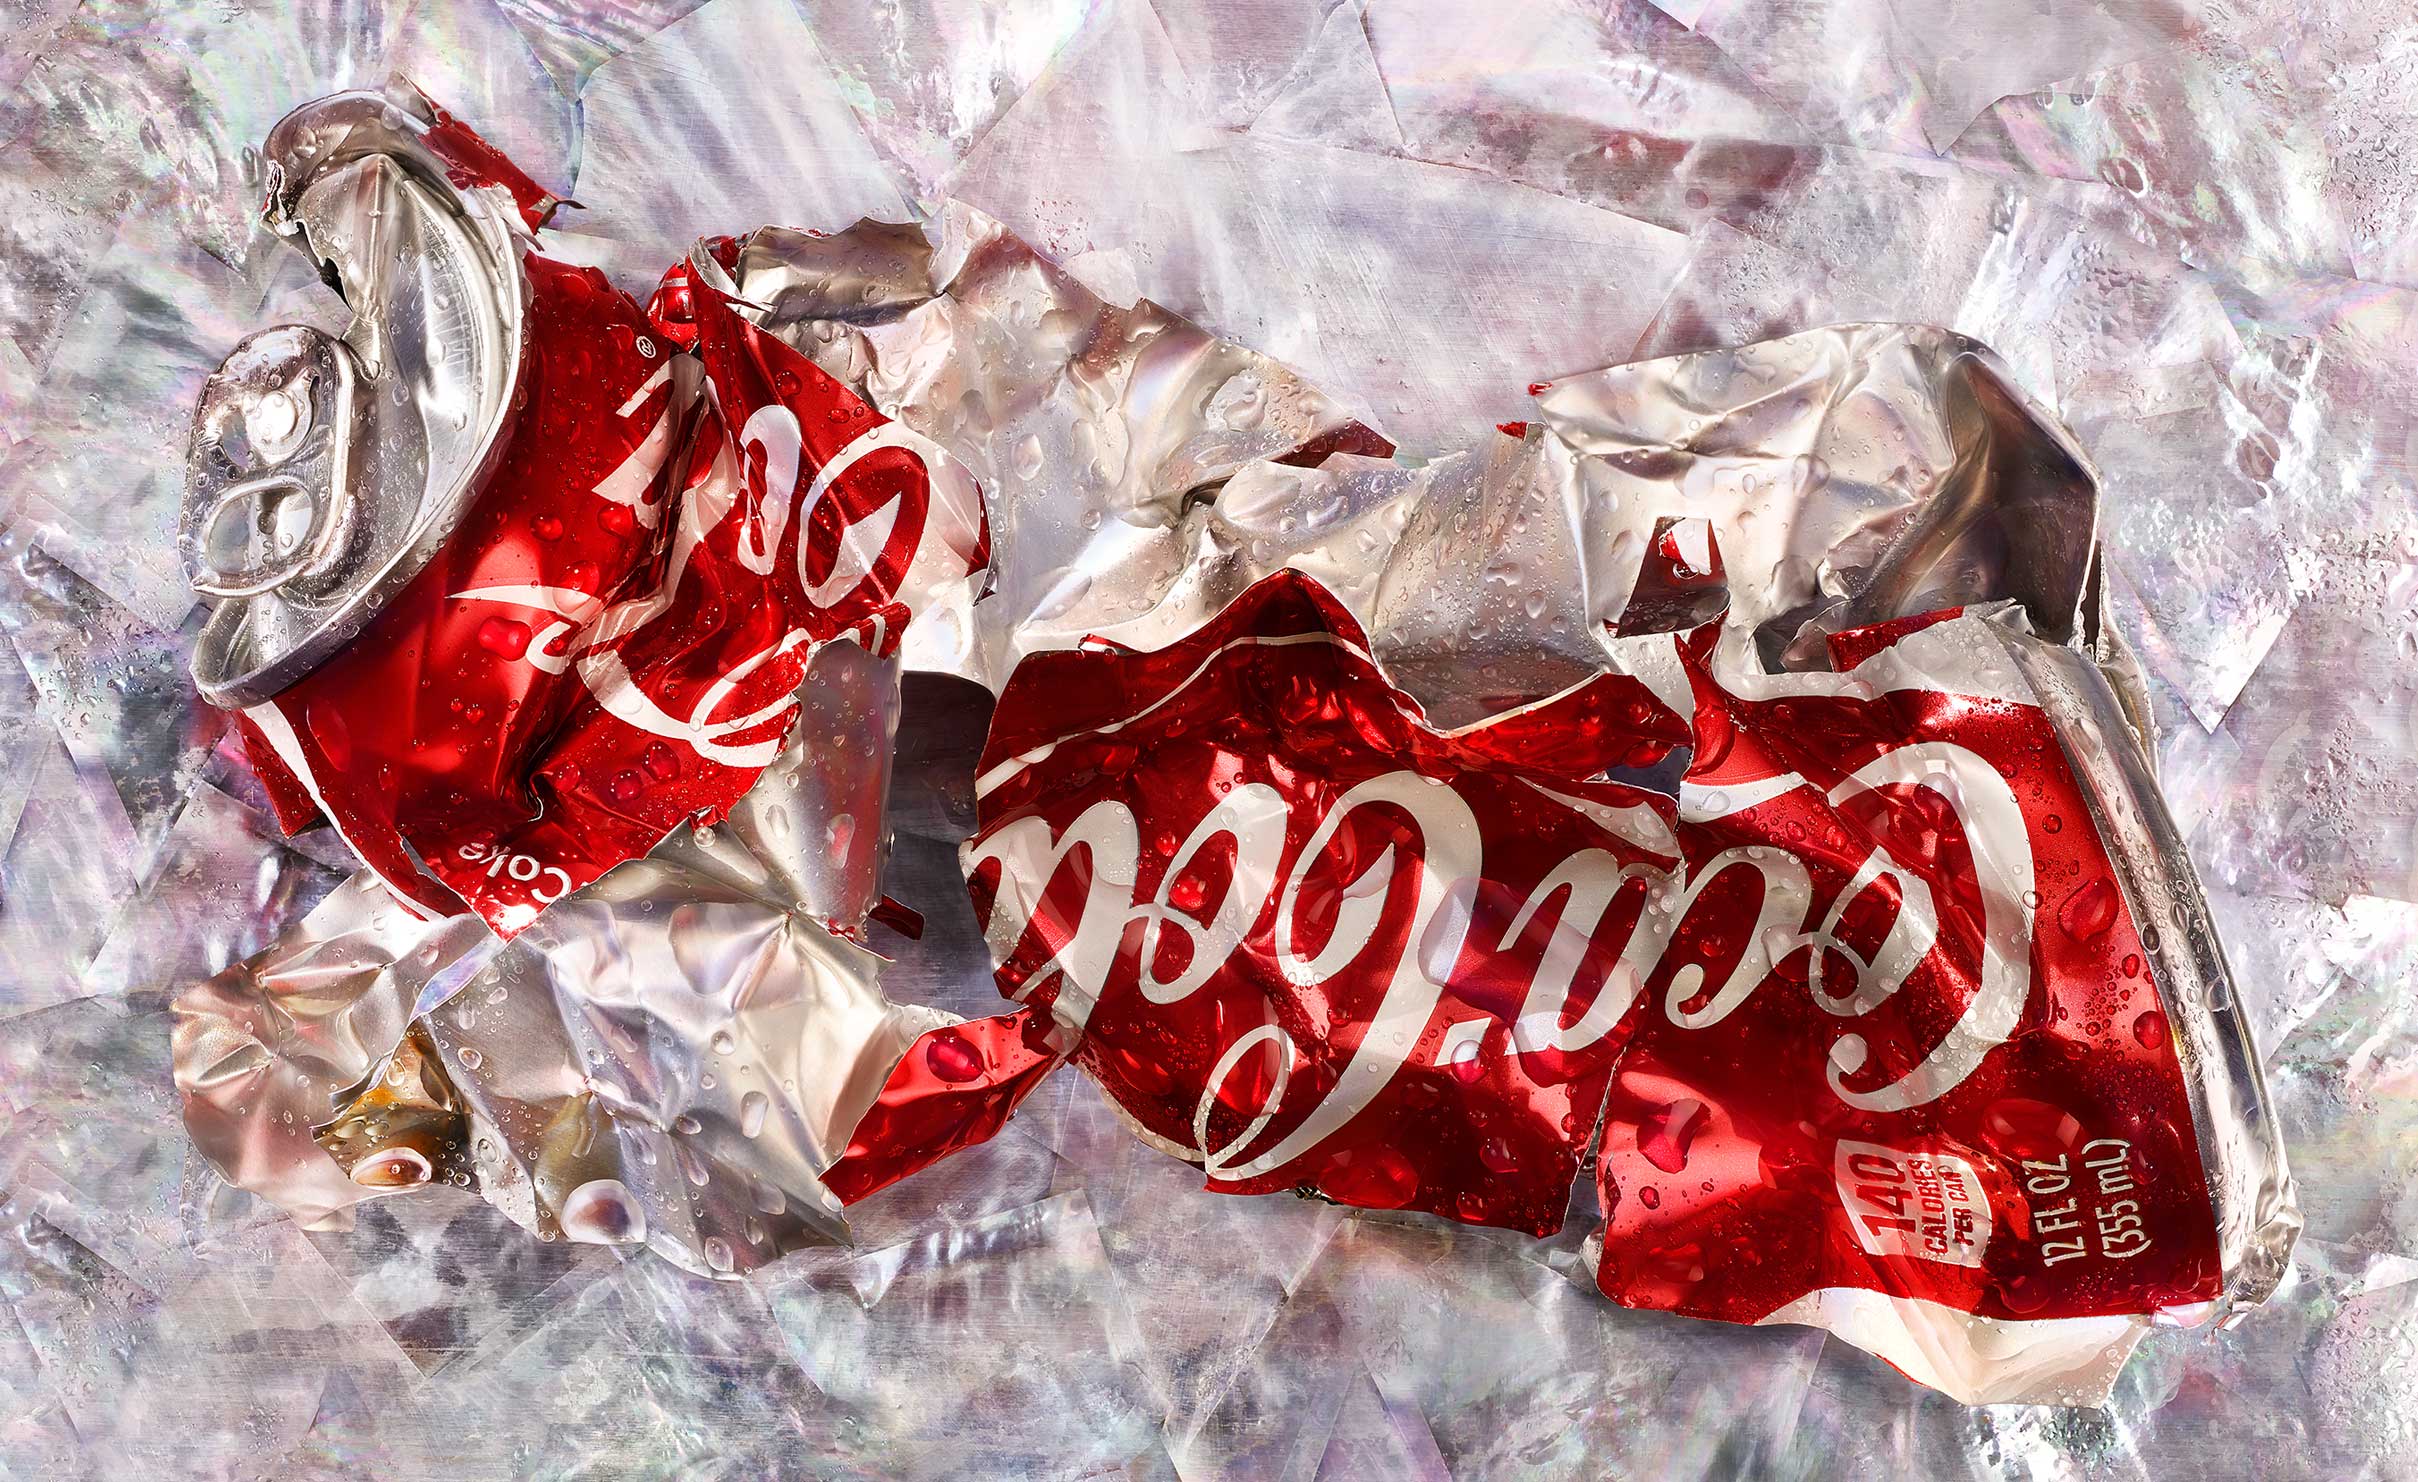 One crushed red and silver Coke aluminum metal soda can on metallic background